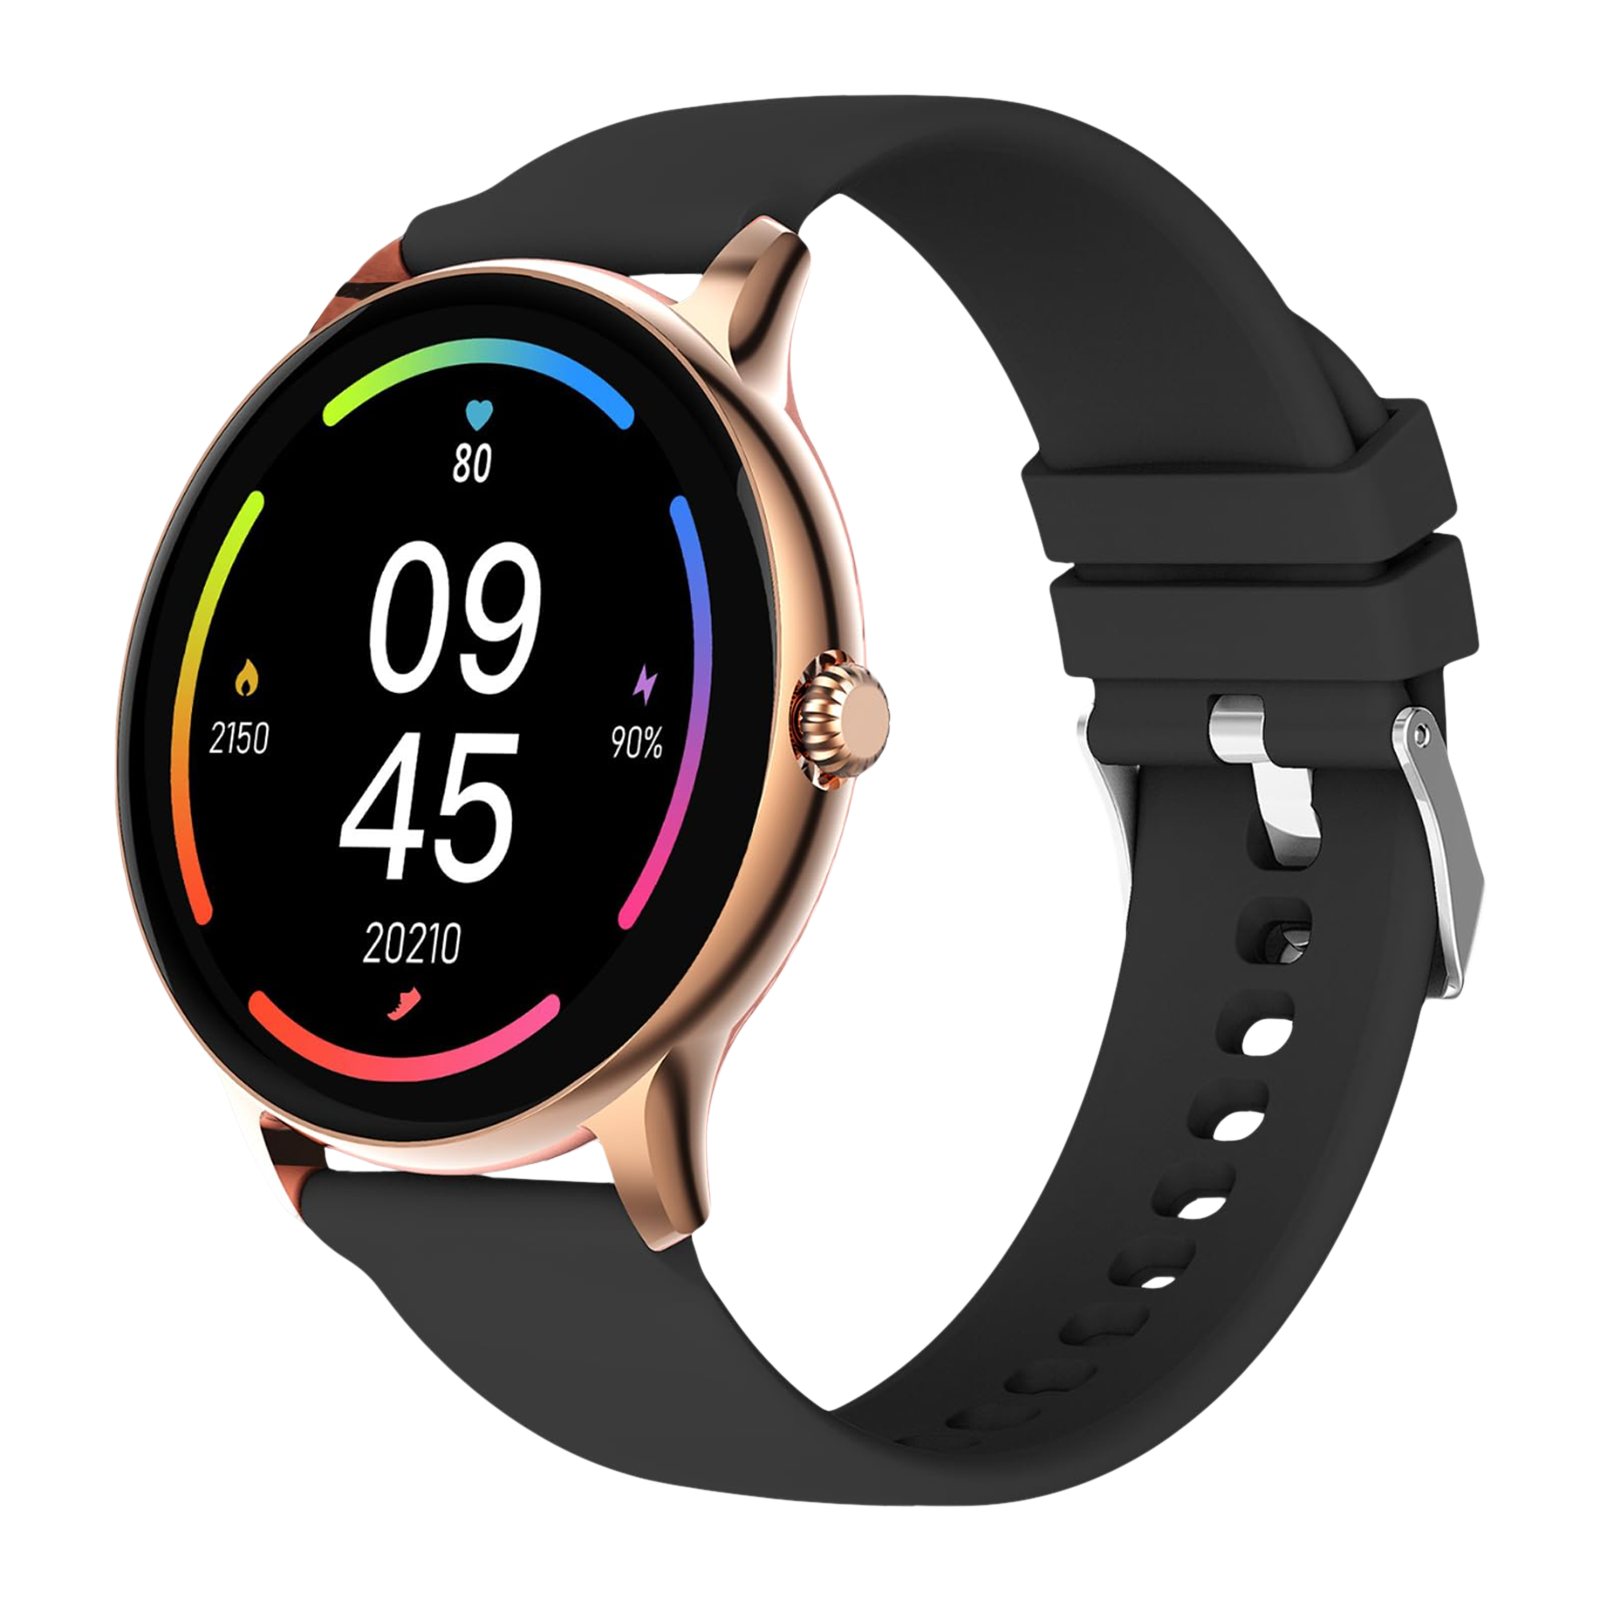 FIRE-BOLTT Phoenix Pro Smartwatch with Bluetooth Calling (35.3mm HD TFT Display, IP67 Water Resistant, Gold Black Strap)